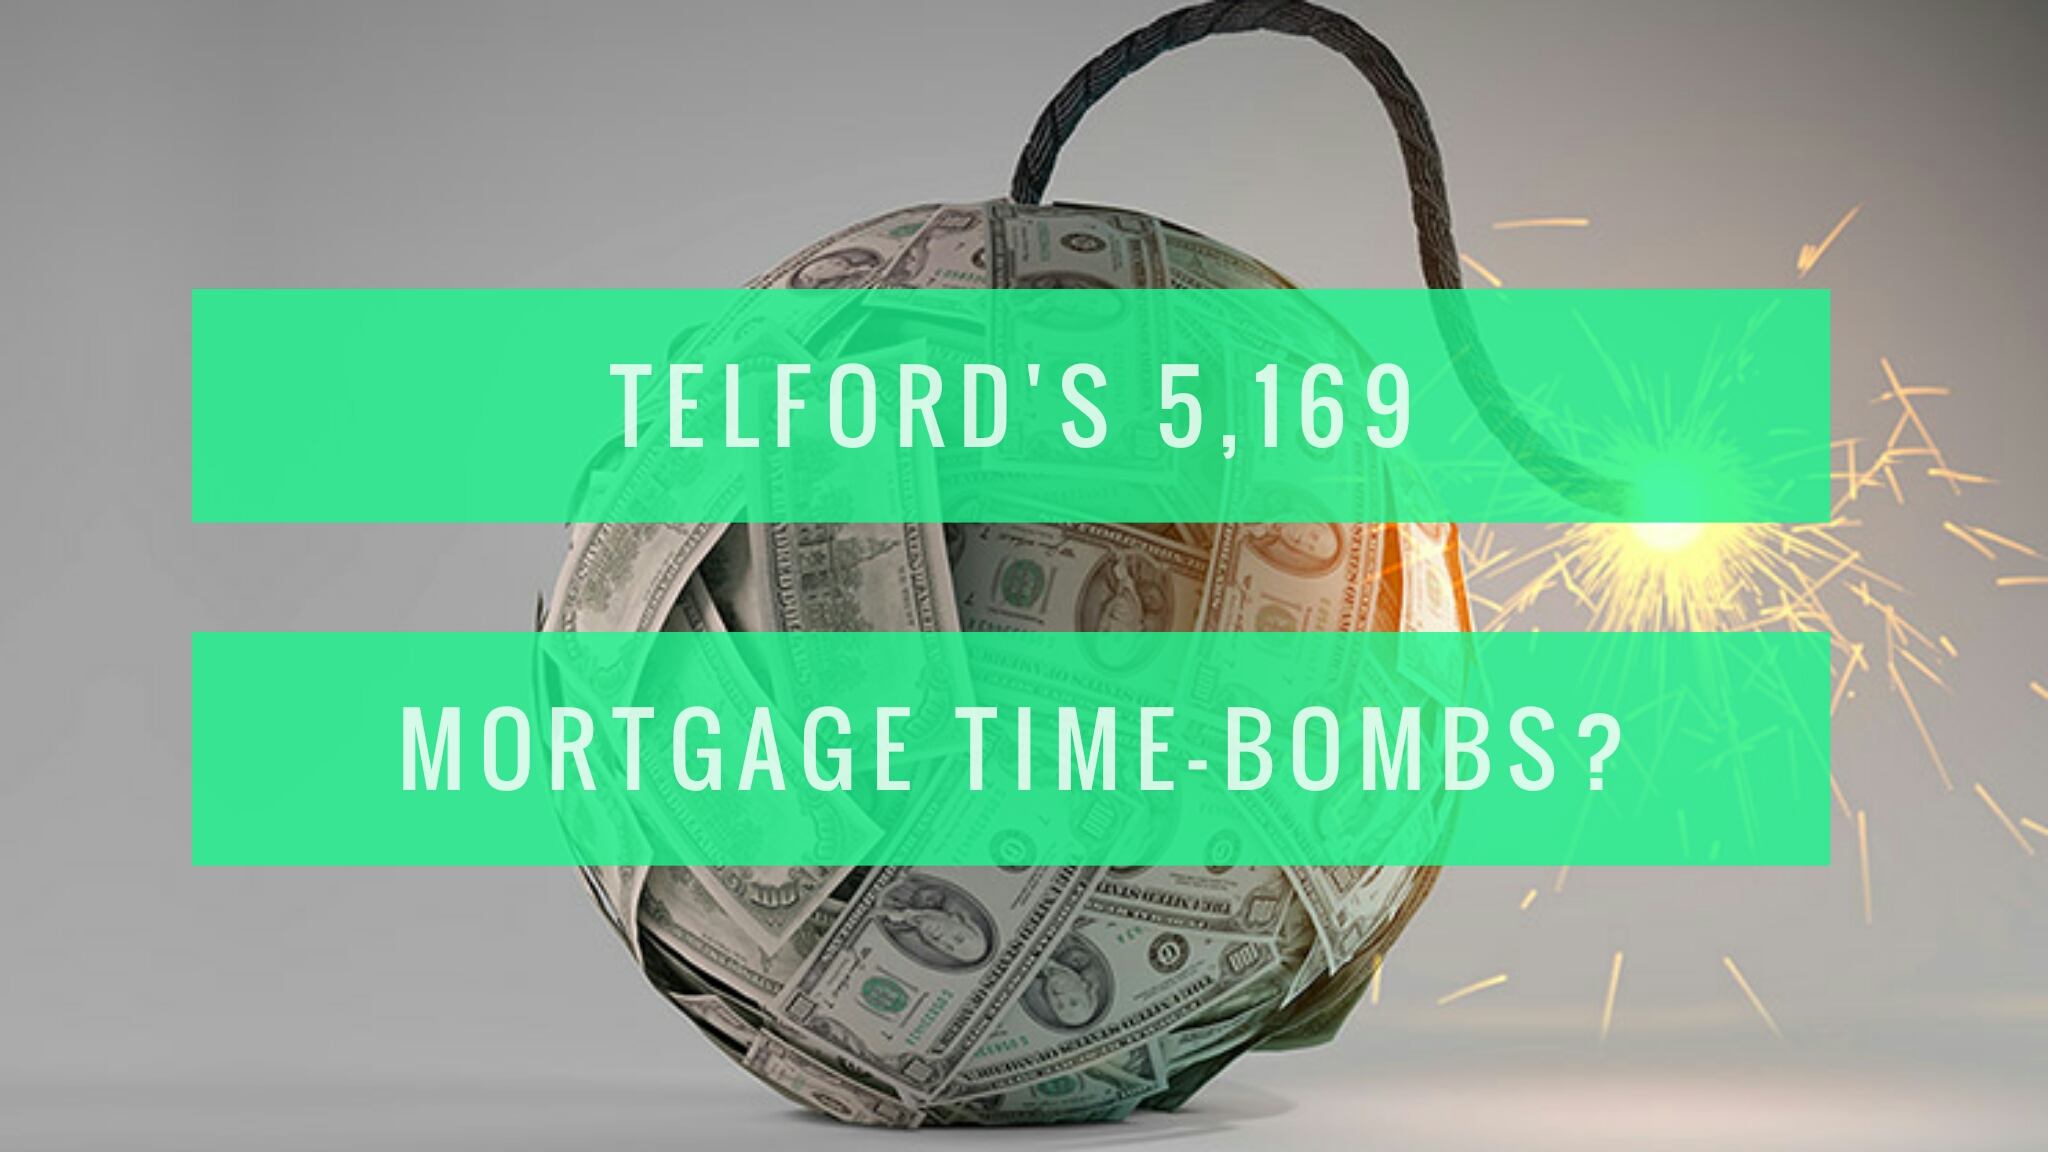 Telford’s 5,169 Mortgage Time-Bombs?